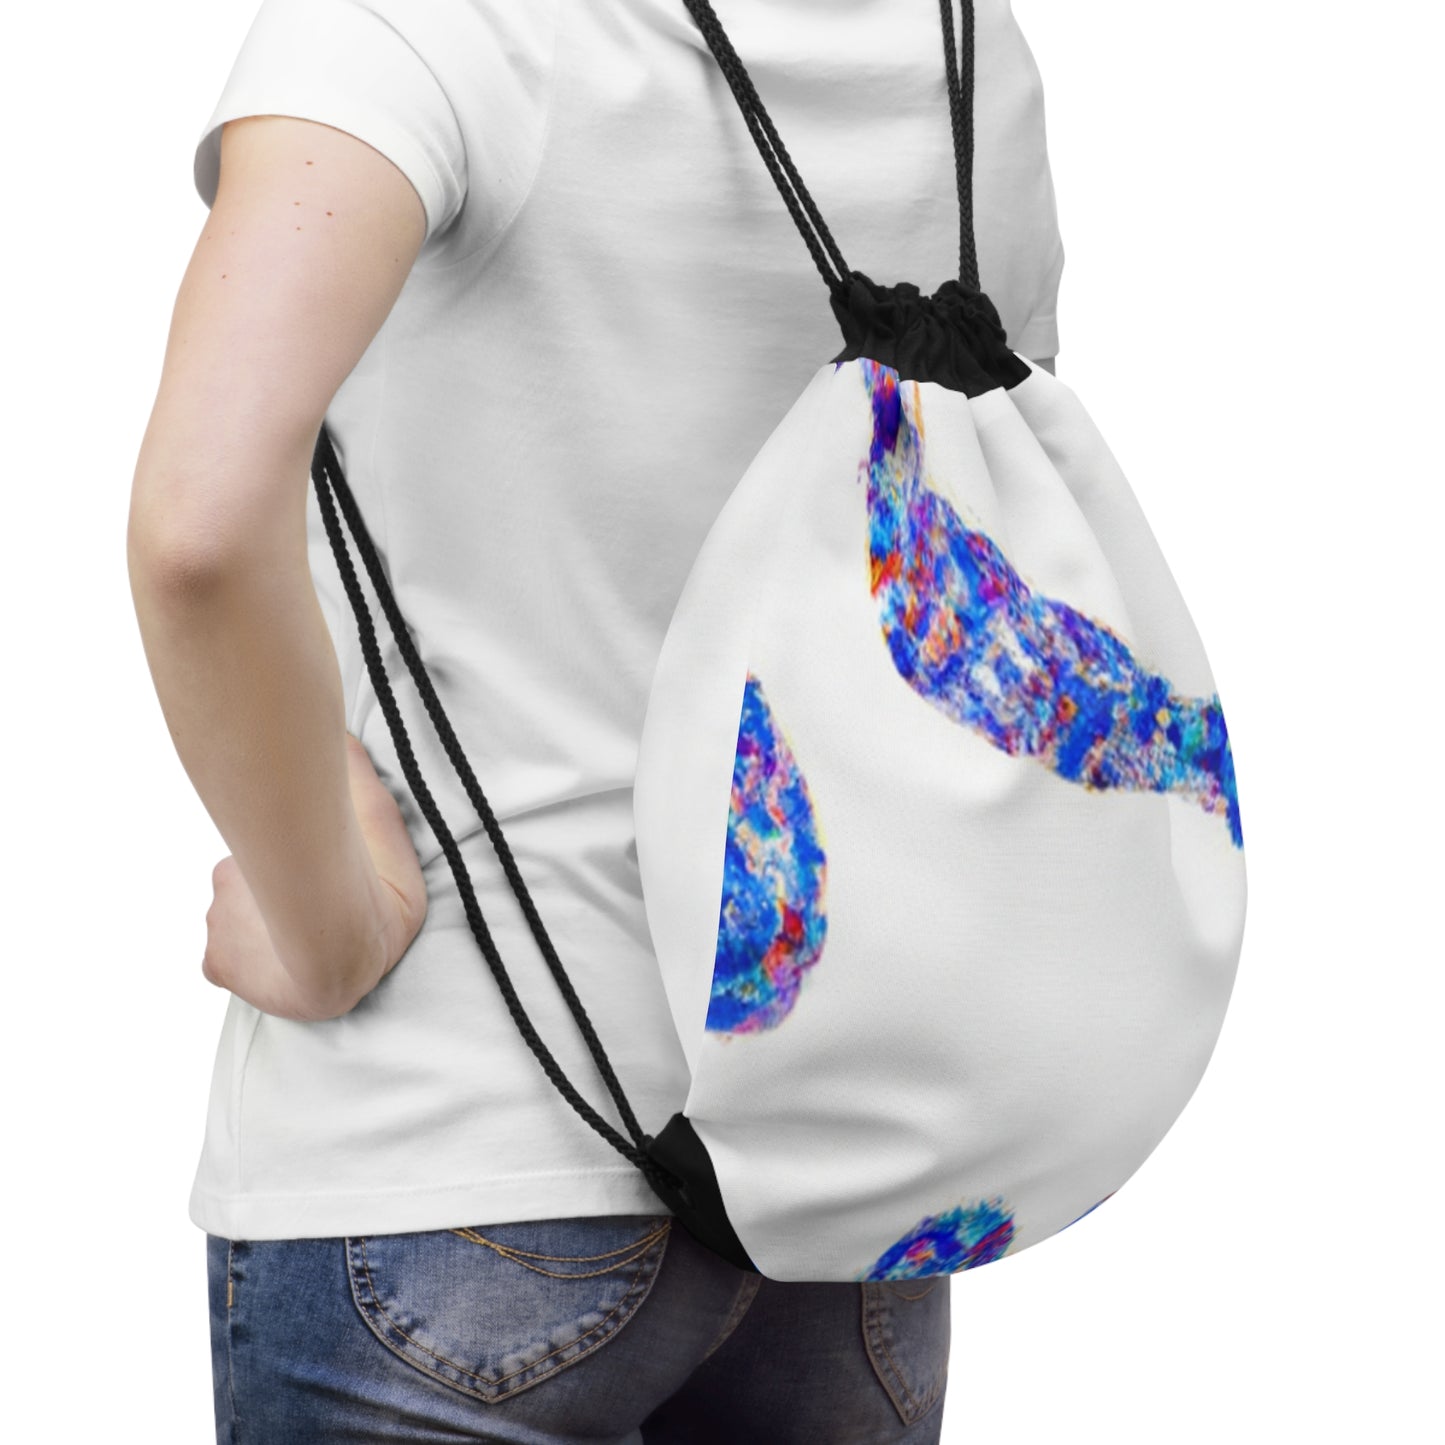 "The Dance of Victory: An Energetic Sport Artpiece" - Go Plus Drawstring Bag